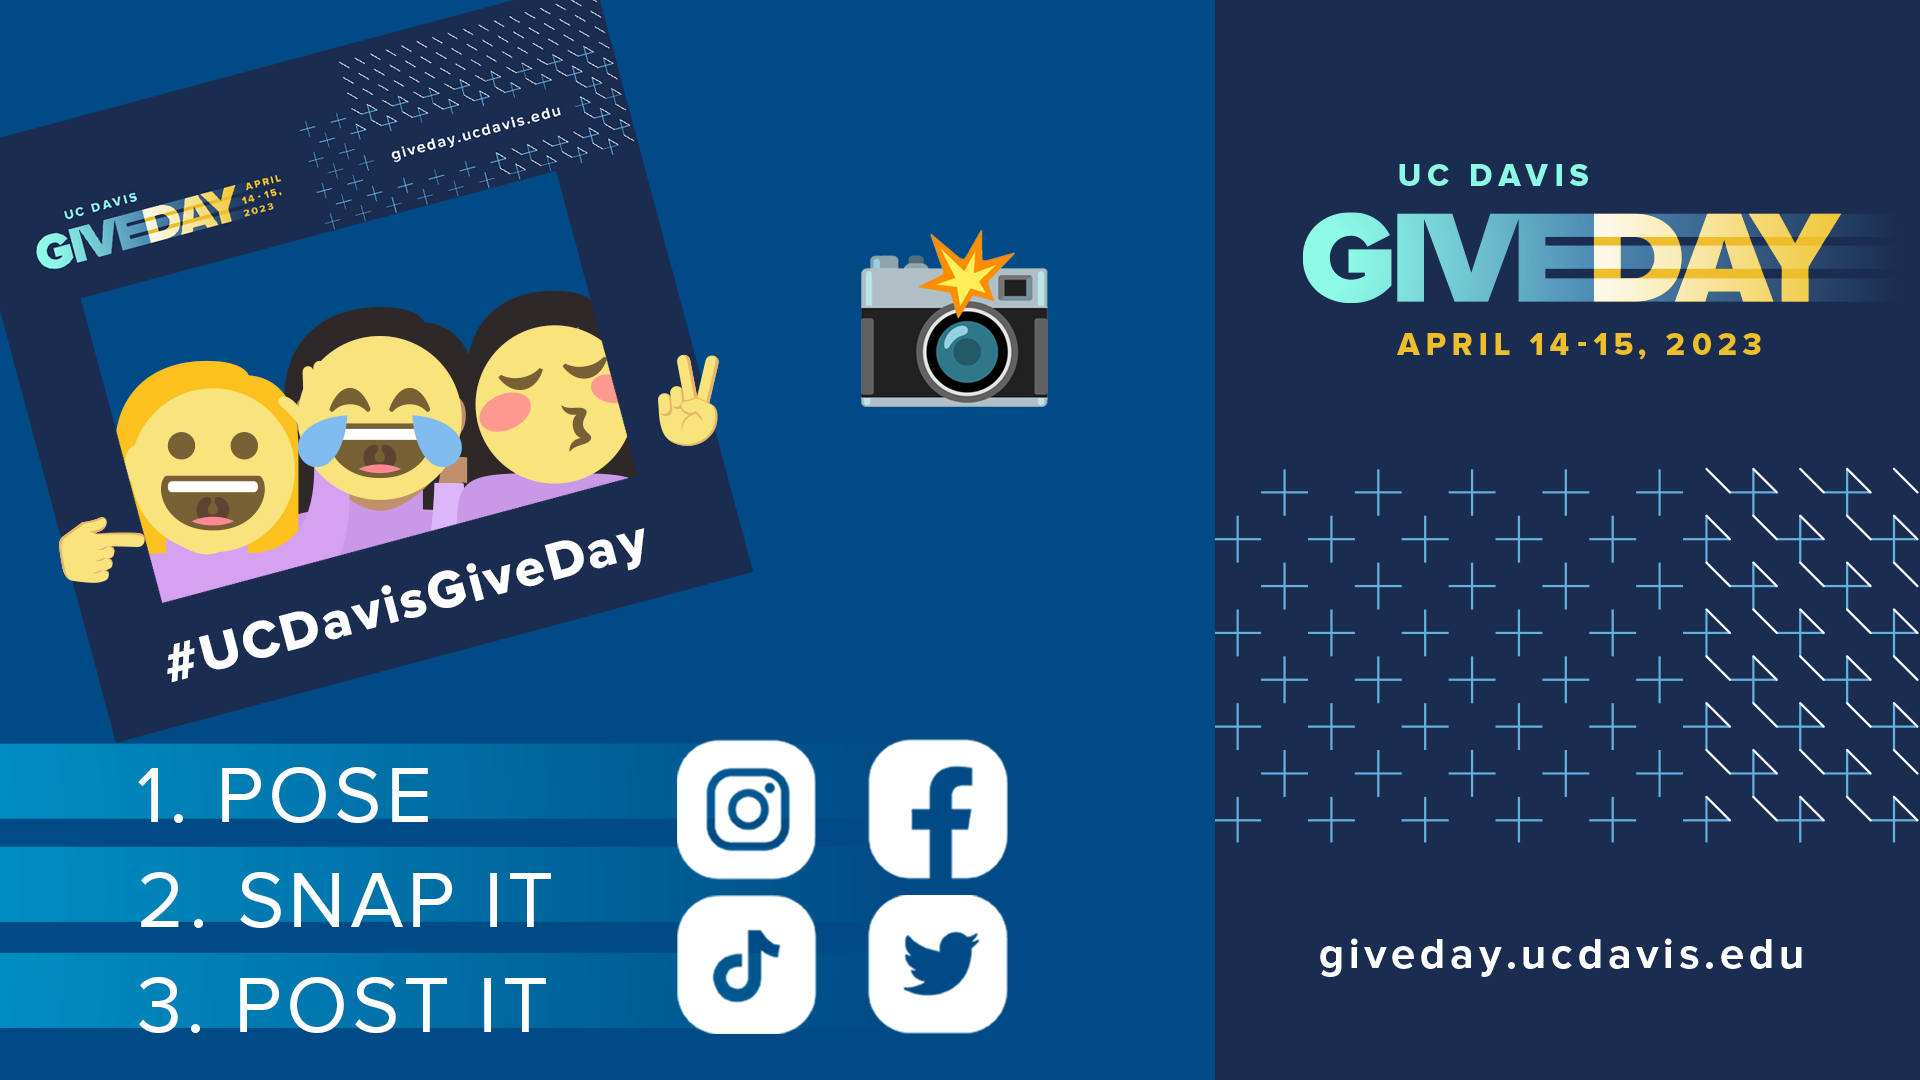 Graphic with a blue background. There is an illustration of a trio of friends posing for a photo while holding a large photo frame with a cutout in the middle. The frame illustration has a hashtag #UCDavisGiveDay and a Give Day logo on top. The text reads 1. Pose 2. Snap it 3. Post it with icons for Instagram, Facebook, TikTok, and Twitter. There is a UC Davis Give Day logo with Expect Greater micropatterns and url for giveday.ucdavis.edu in white.